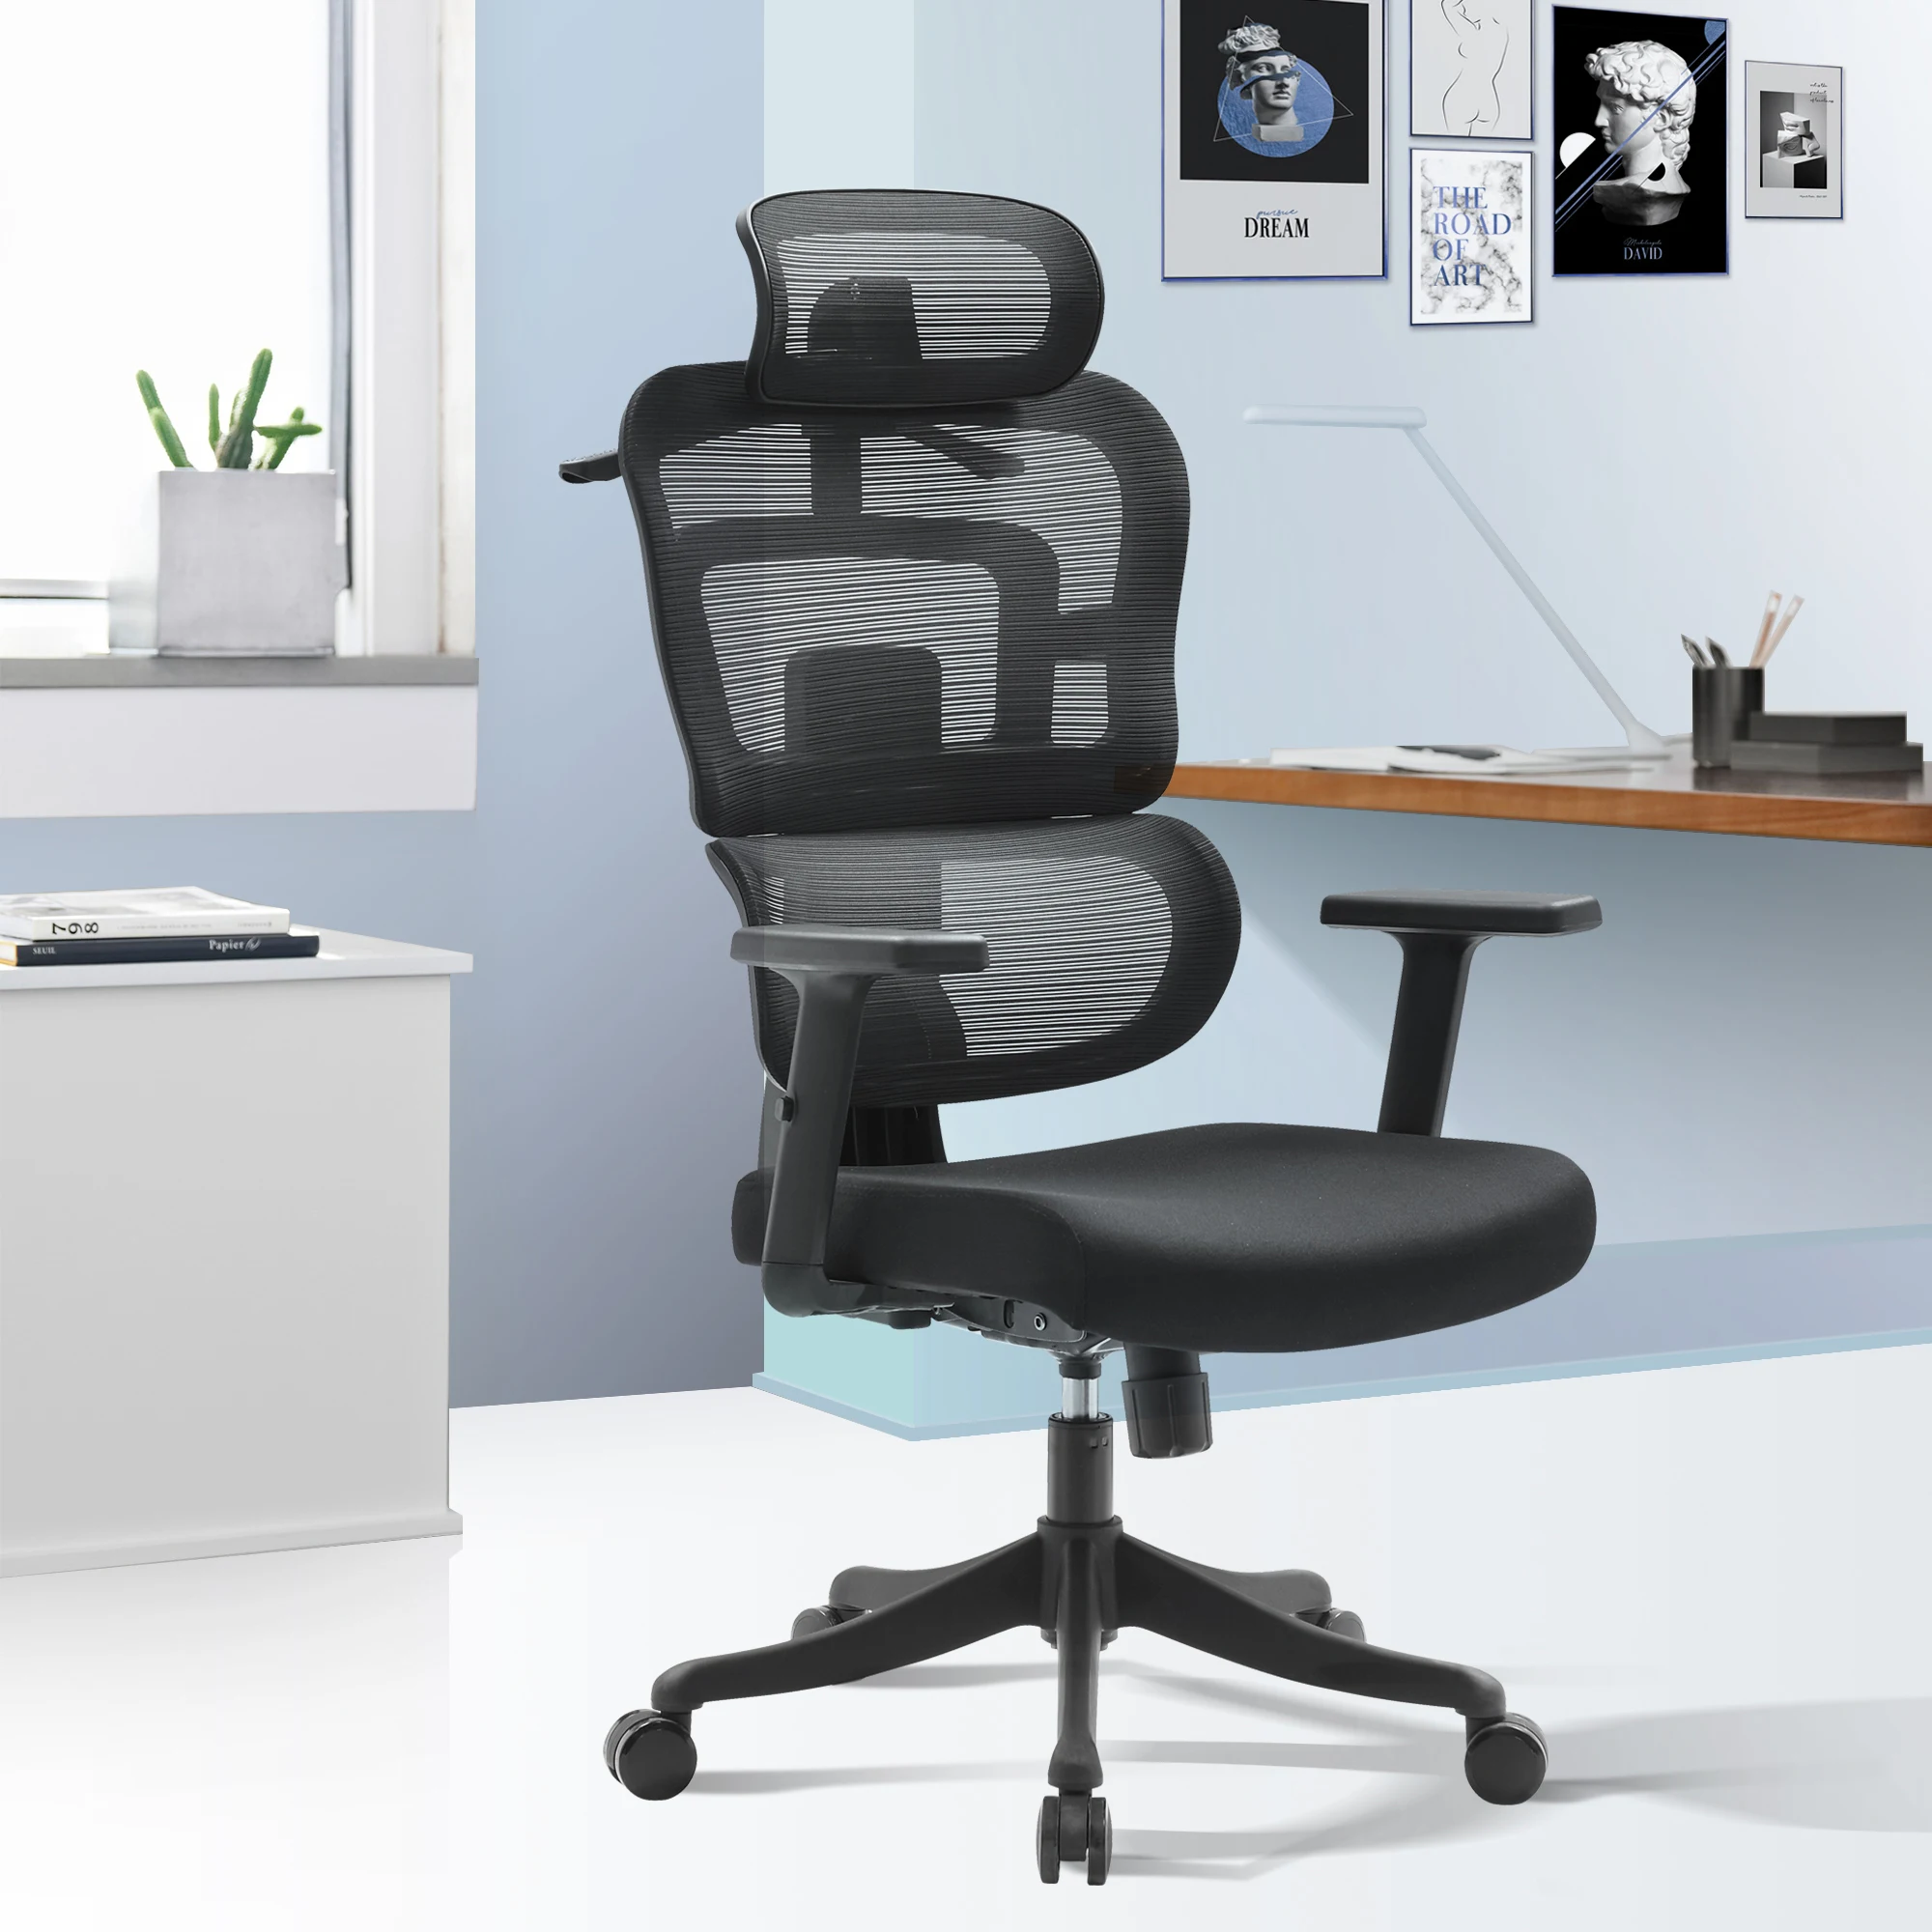 Samofu Ergonomic Office Chair with Foot Rest, High Back Desk Chair with 3D Adjustable Backrest, Mesh Computer Chair with 5D Armrest and Breathable